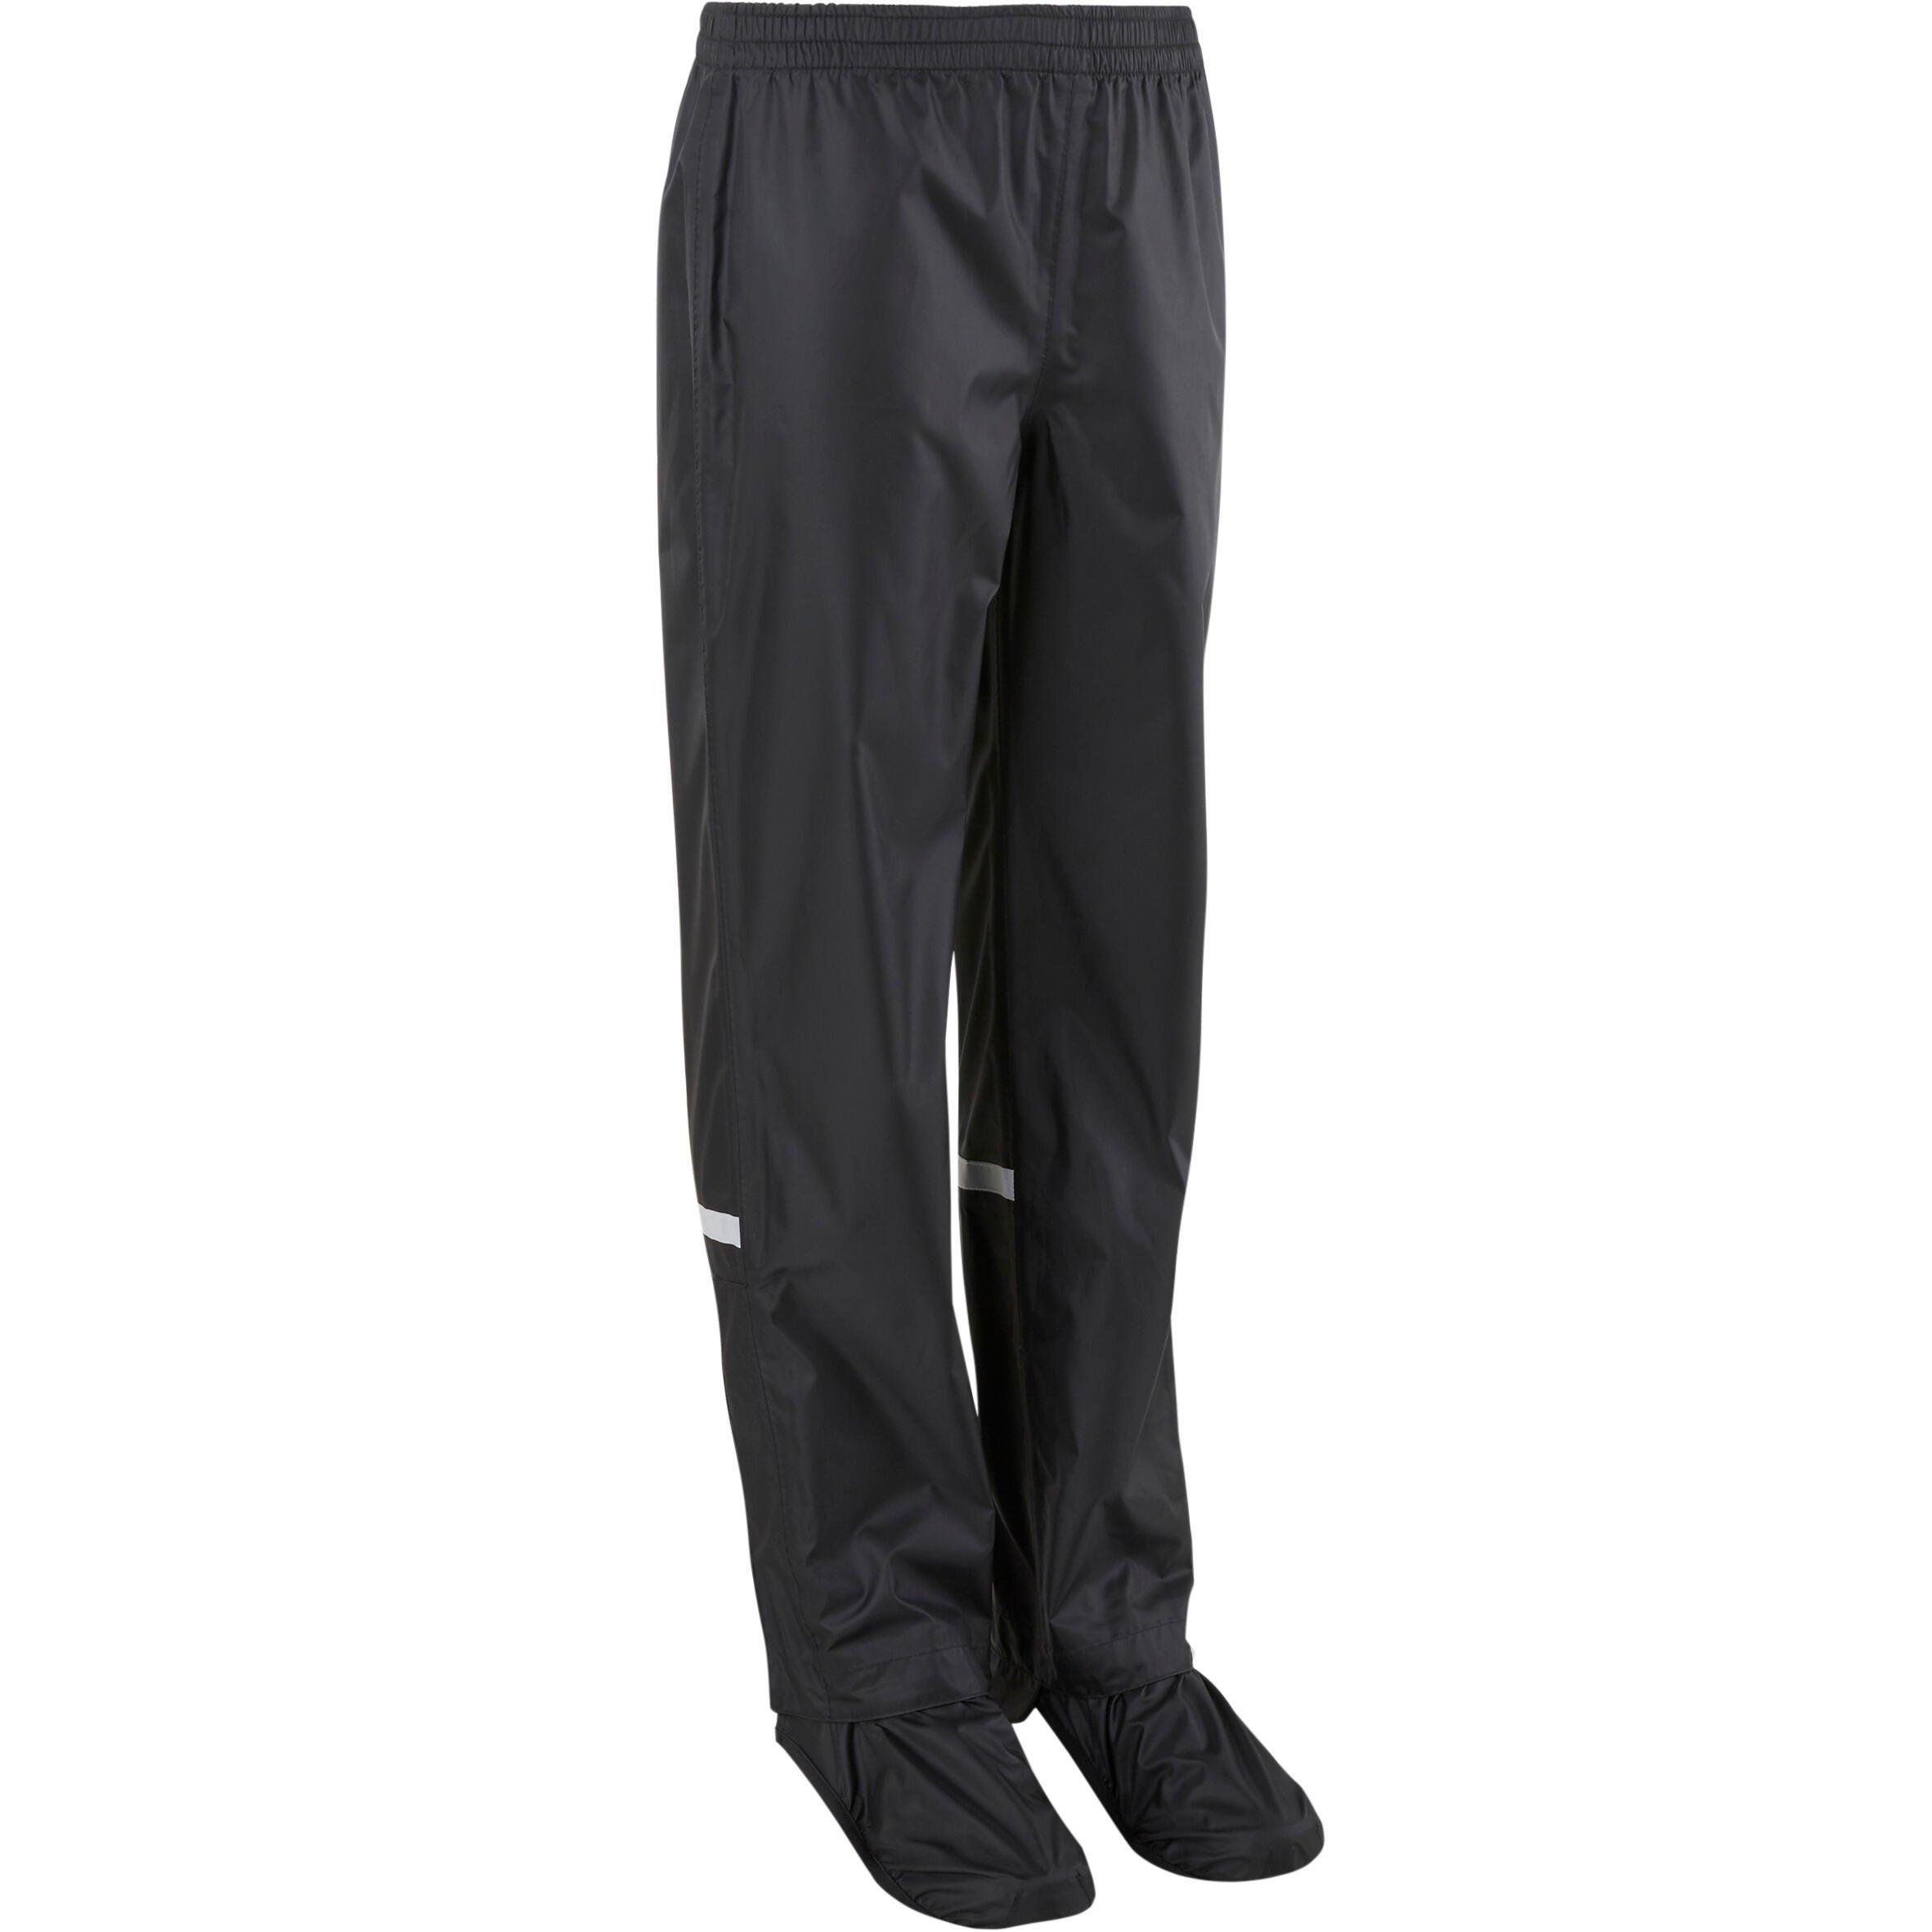 Decathlon Kids’ Waterproof Cycling Overtrousers 500